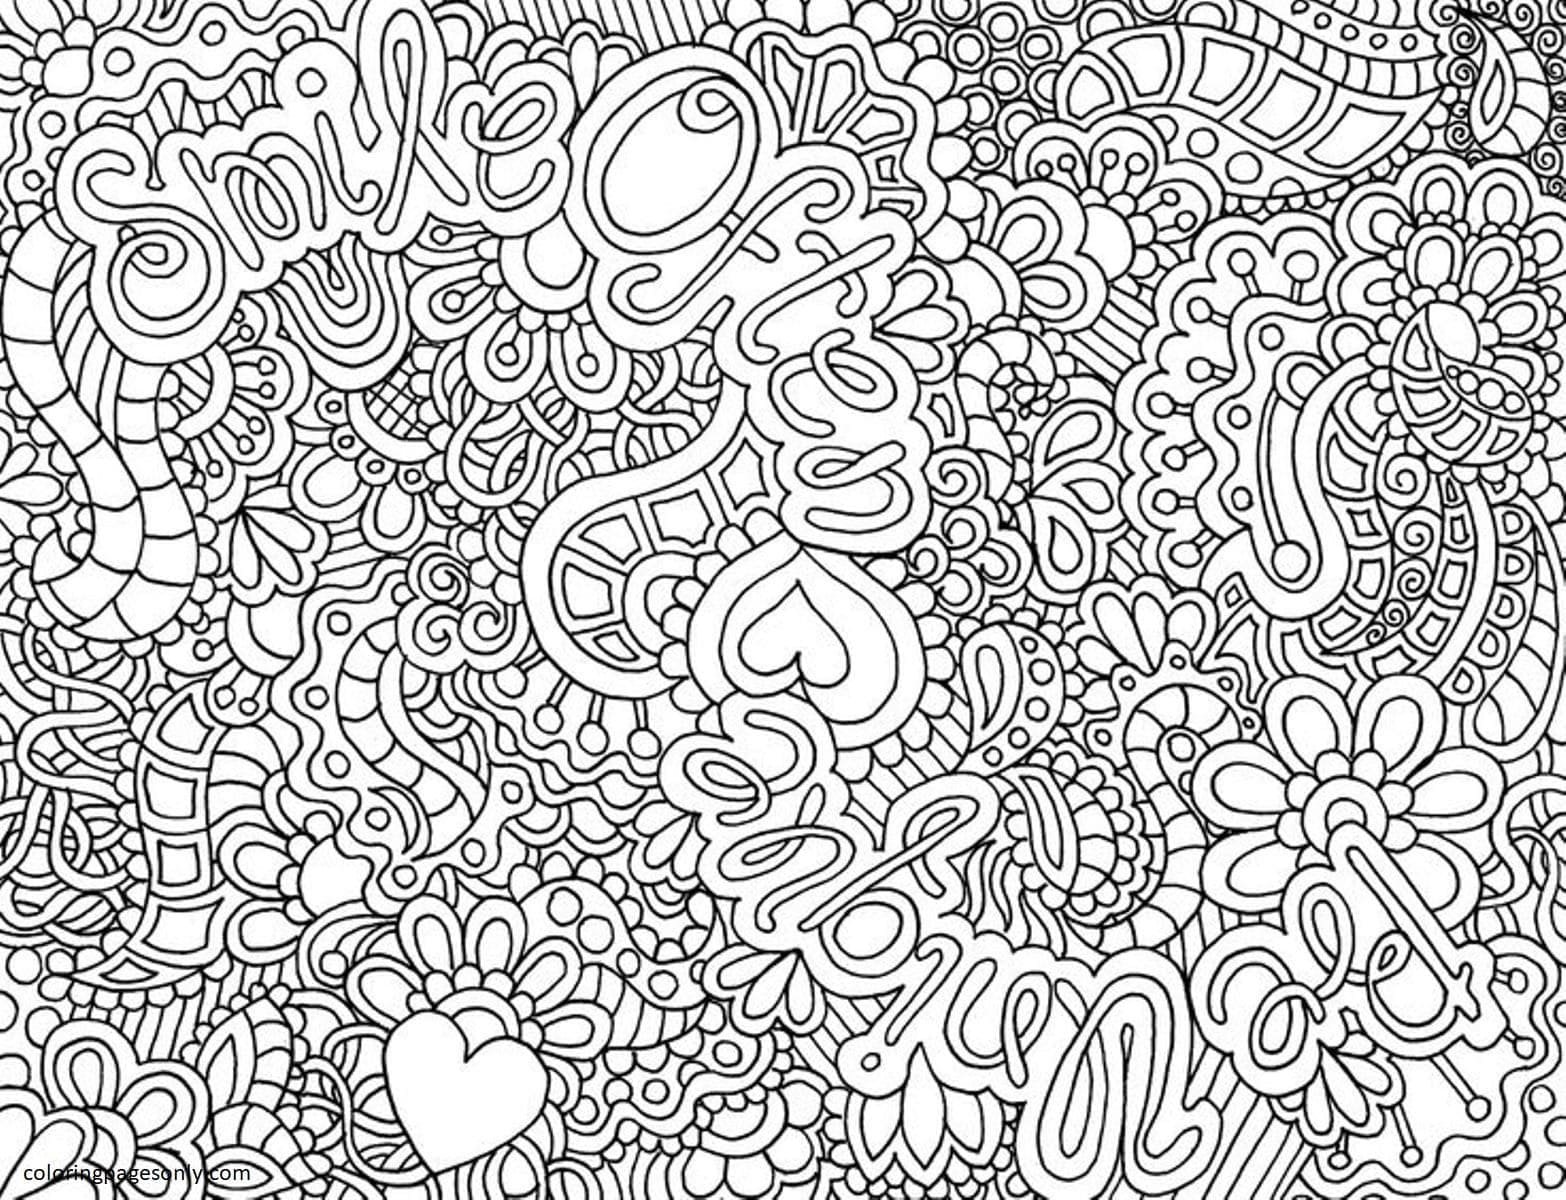 Teenage coloring pages printable for free download